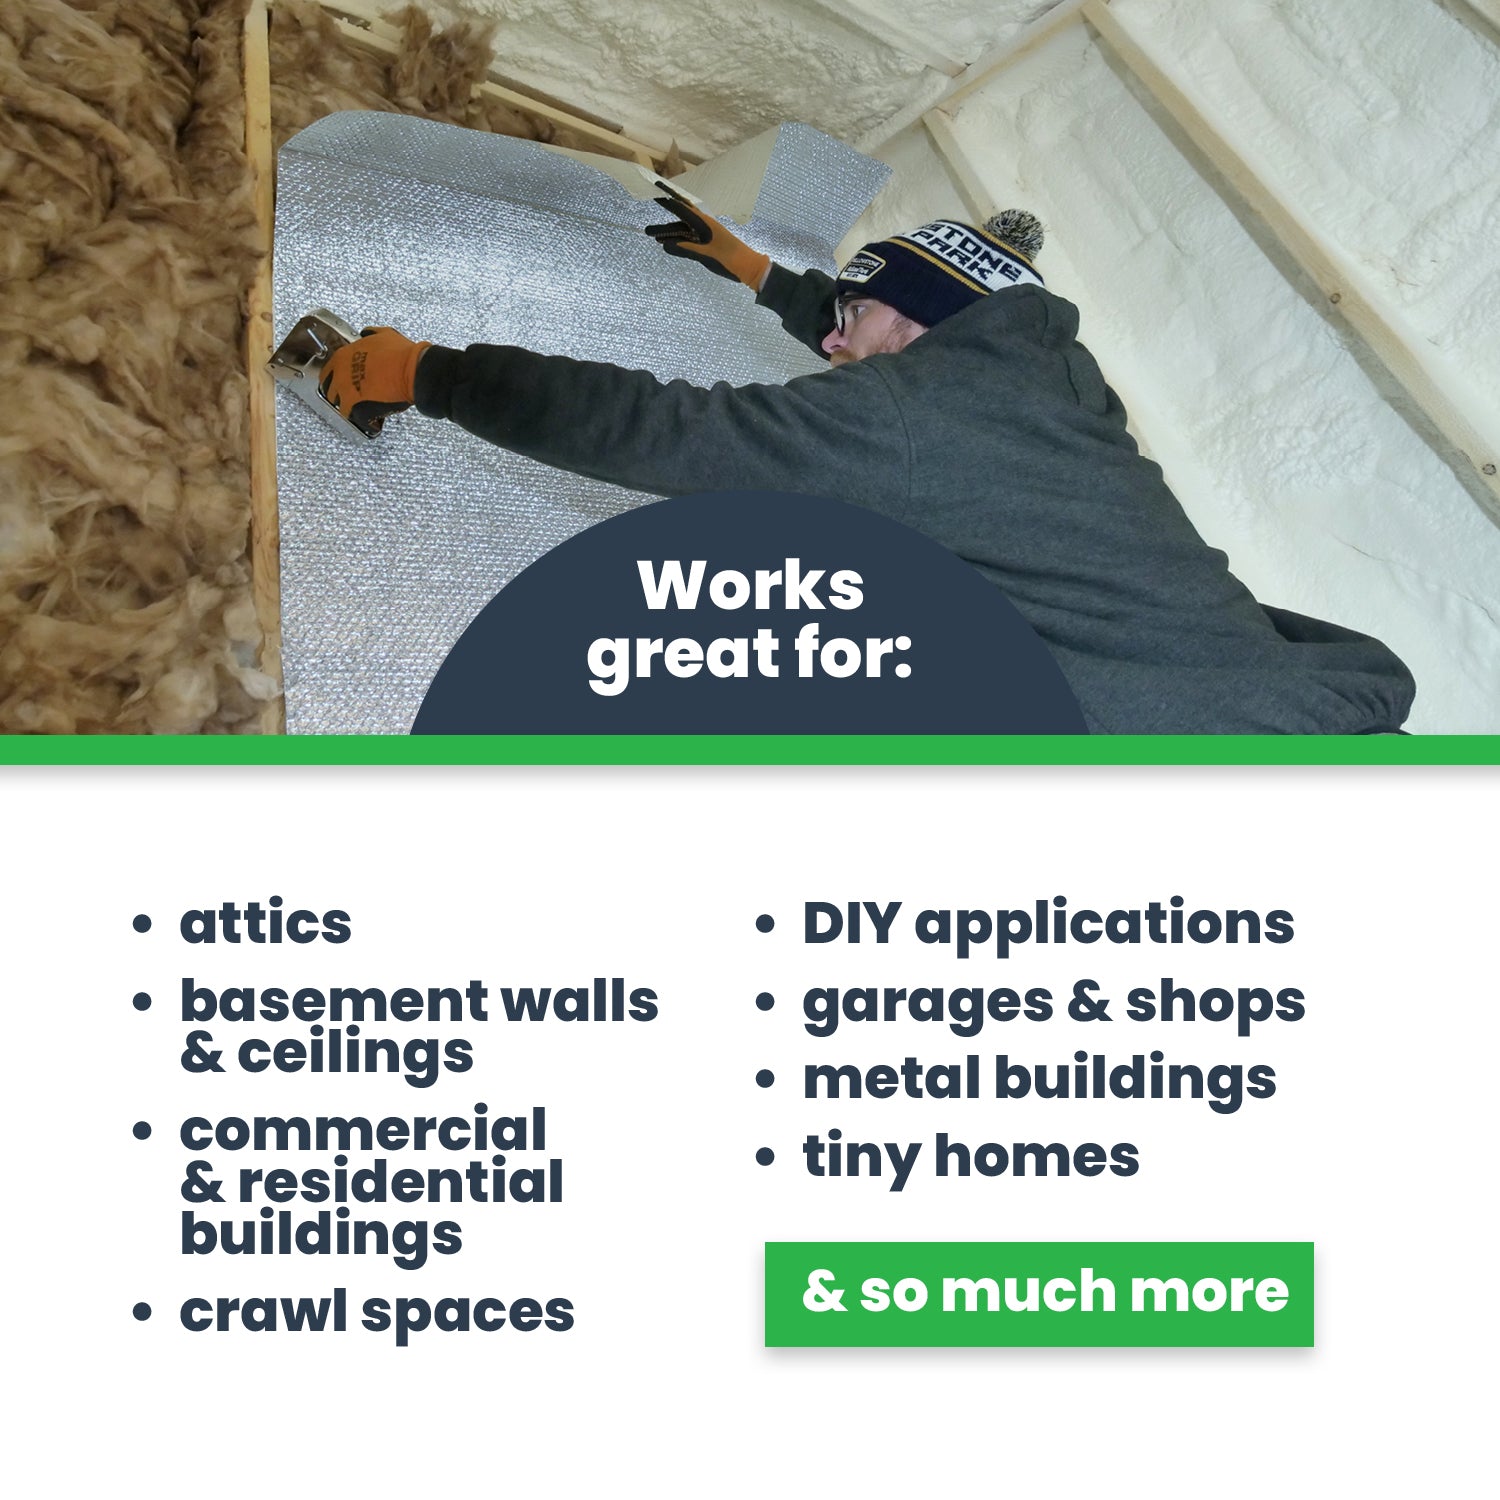 Single bubble insulation for attics, basement walls/ceilings, commercial and residential buildings, crawl spaces, DIY applications, garages and shops, metal buildings, and tiny homes